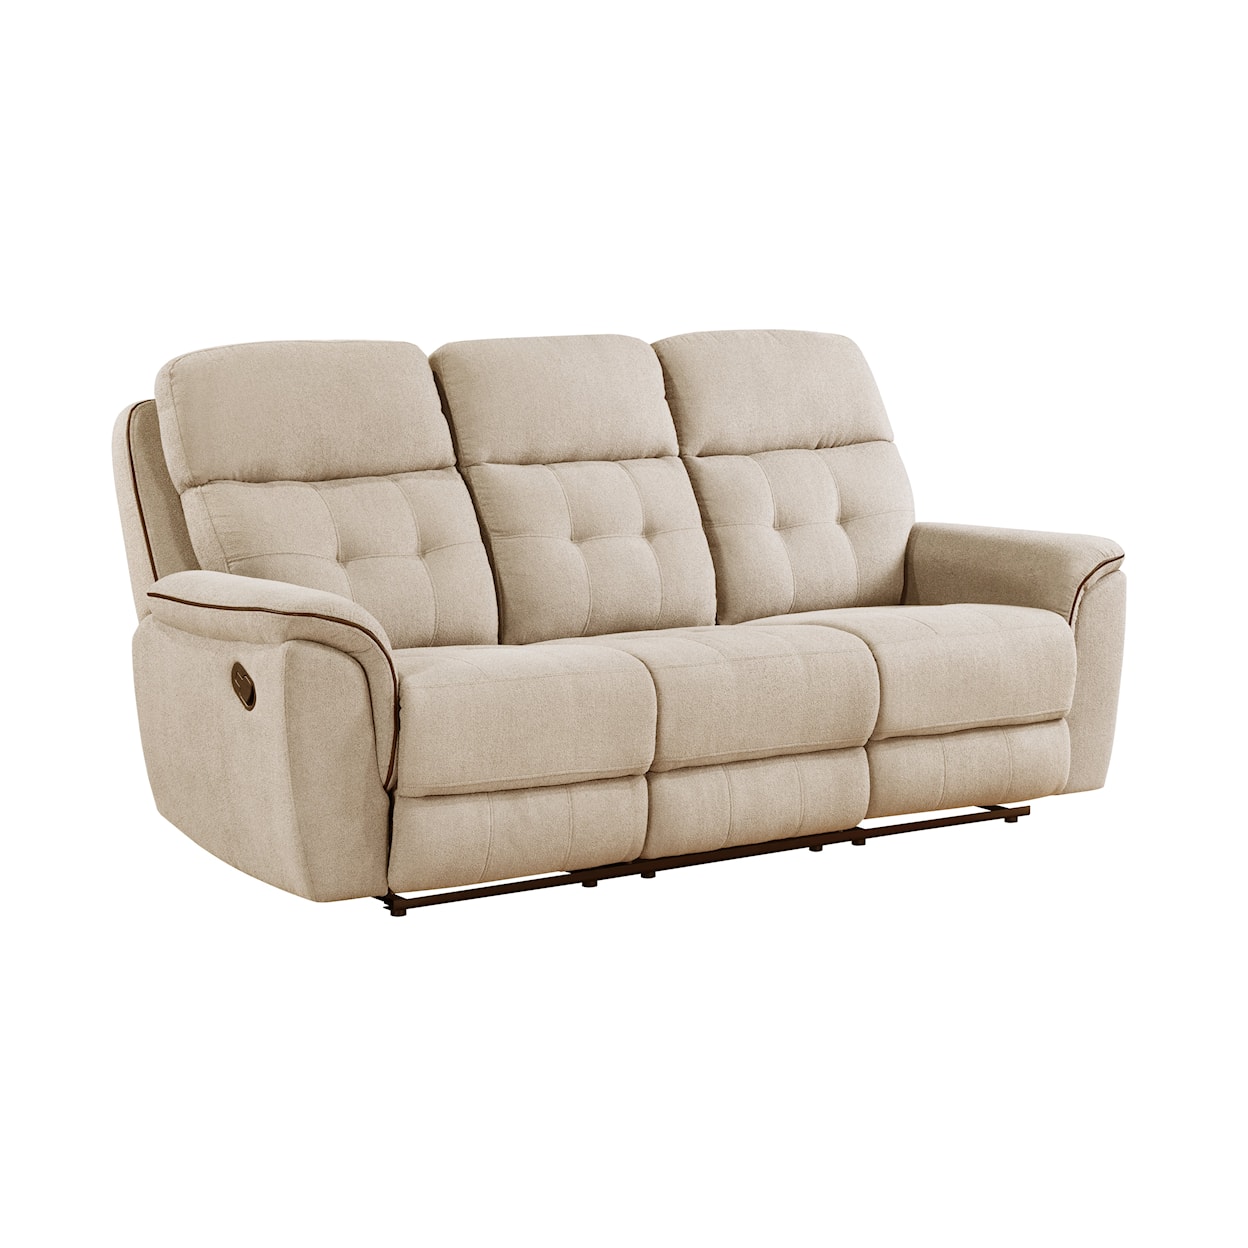 Holland House Solace Reclining Sofa